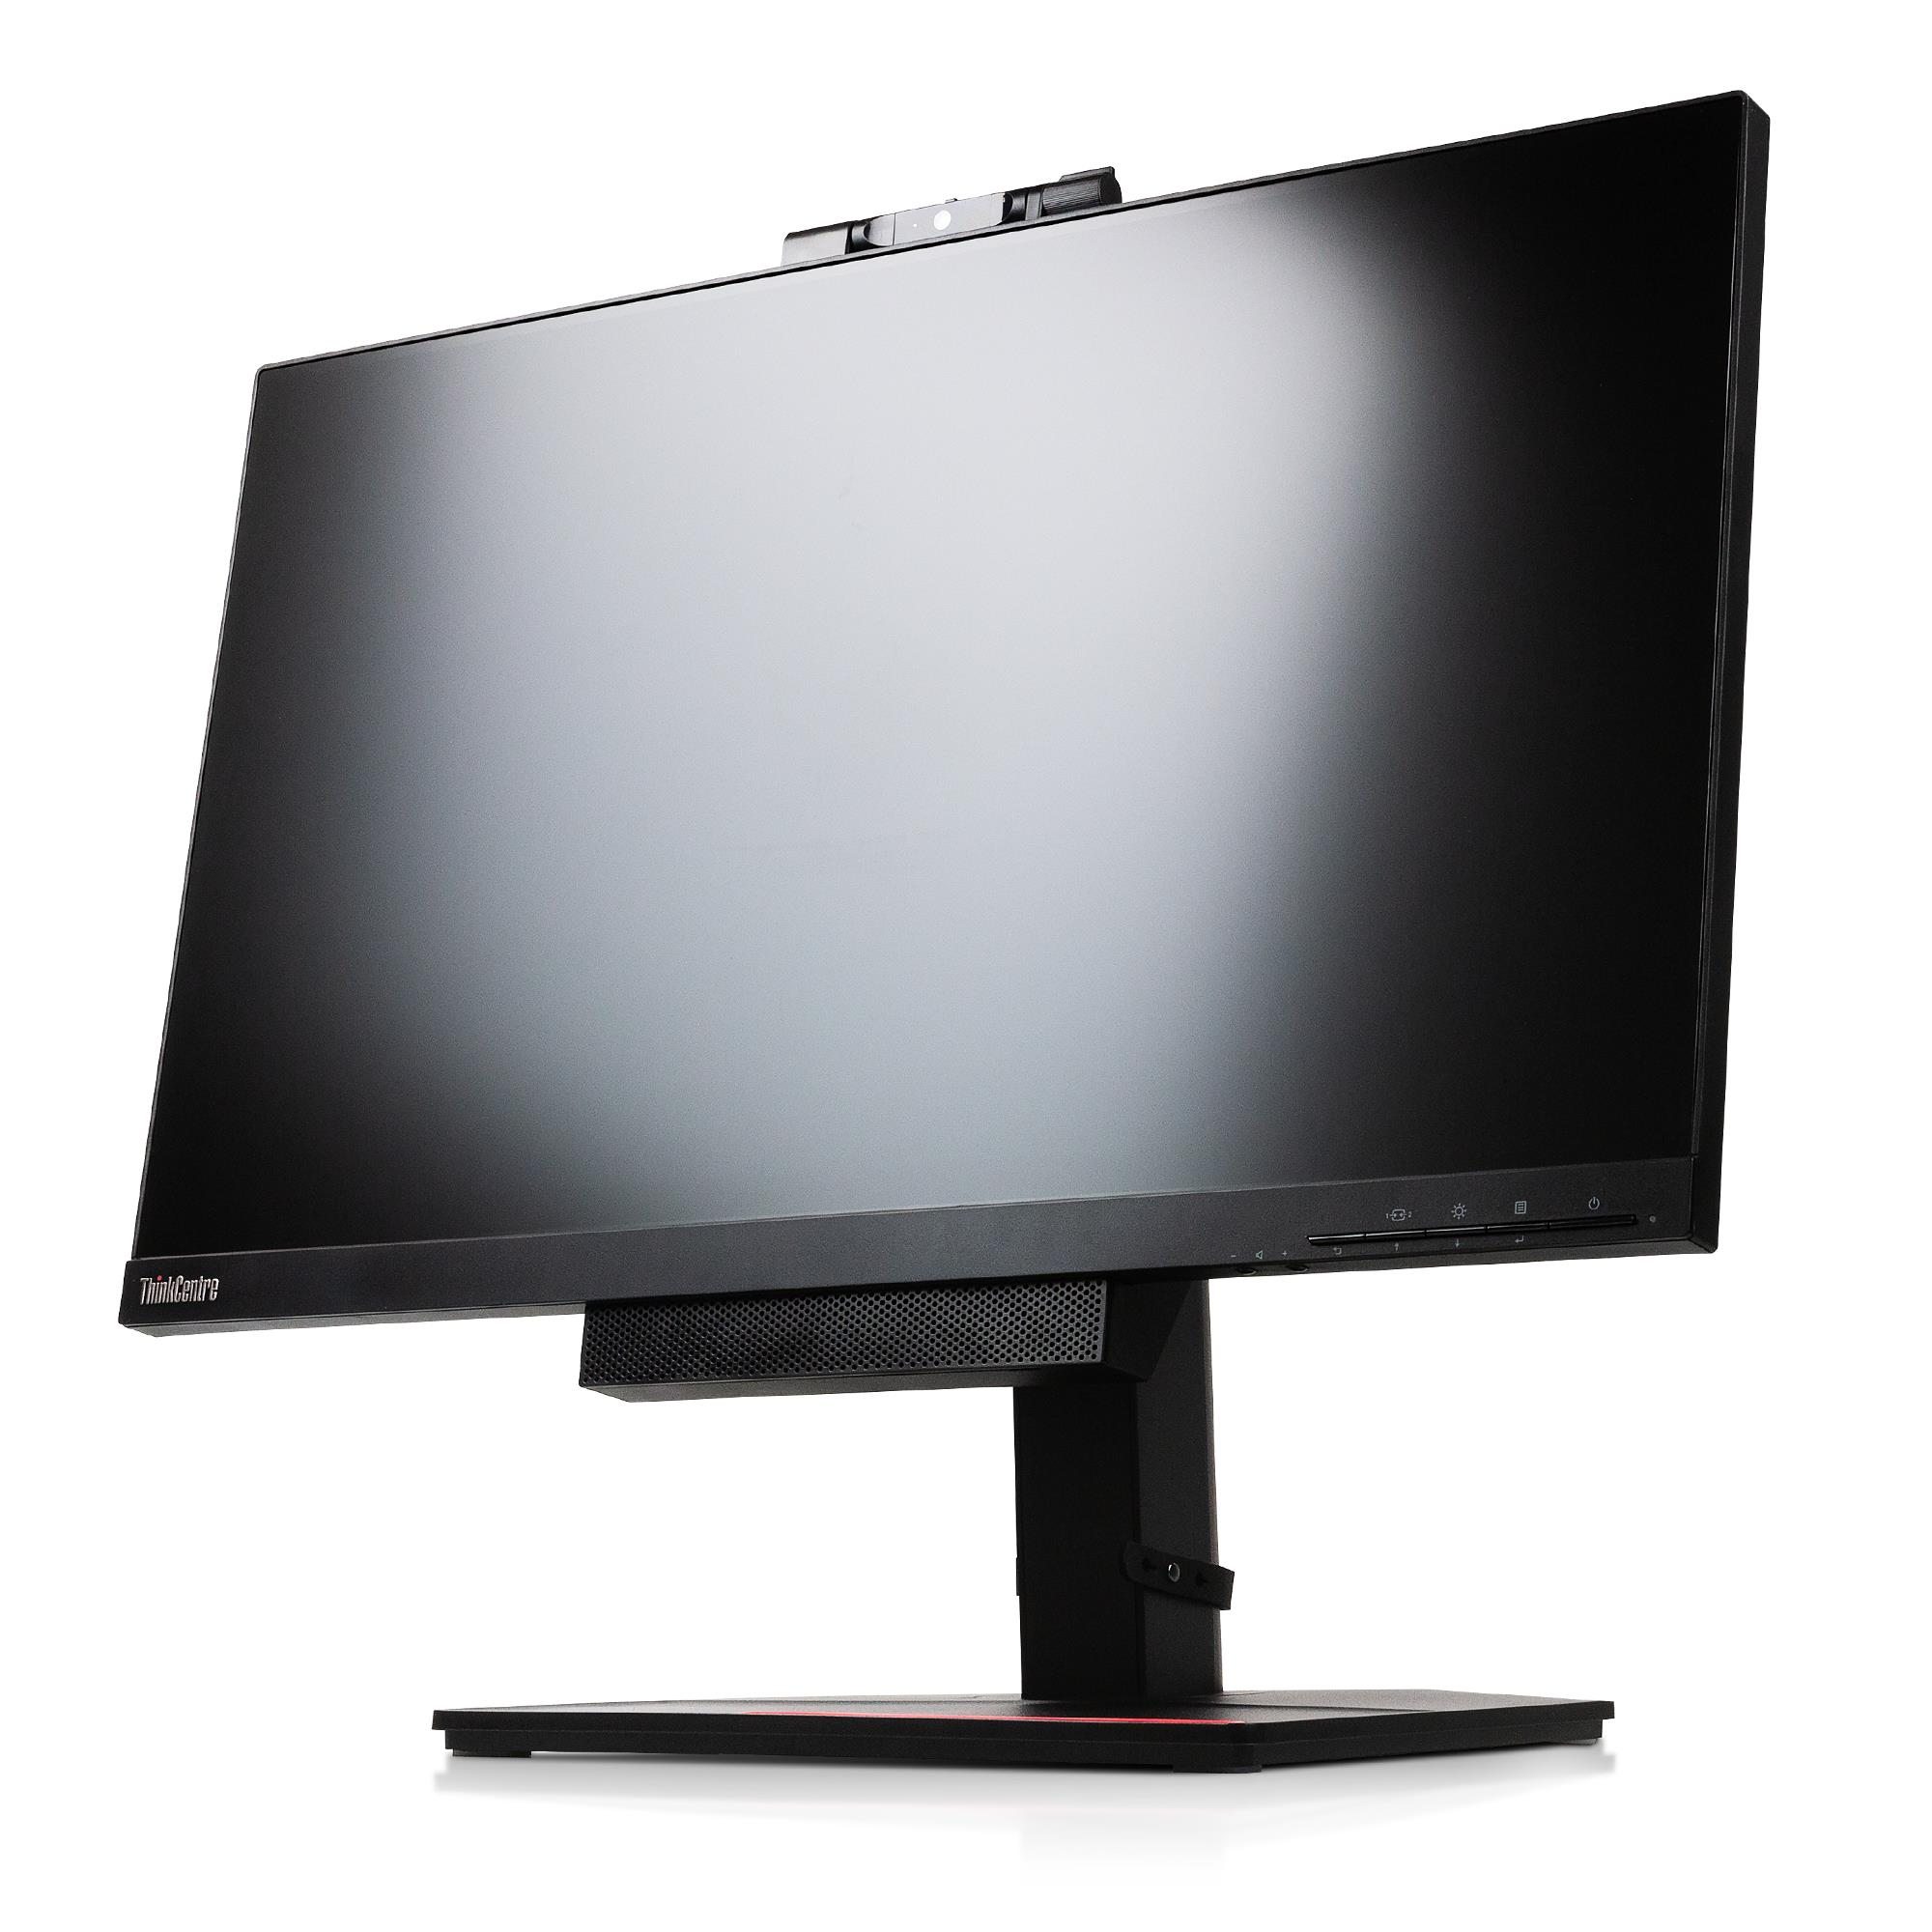 LENOVO REFURBISHED (*) ThinkCentre Tiny-in-One ) 23,80 Full-HD Zoll ms 24 Reaktionszeit TFT-Monitor (14 Gen4